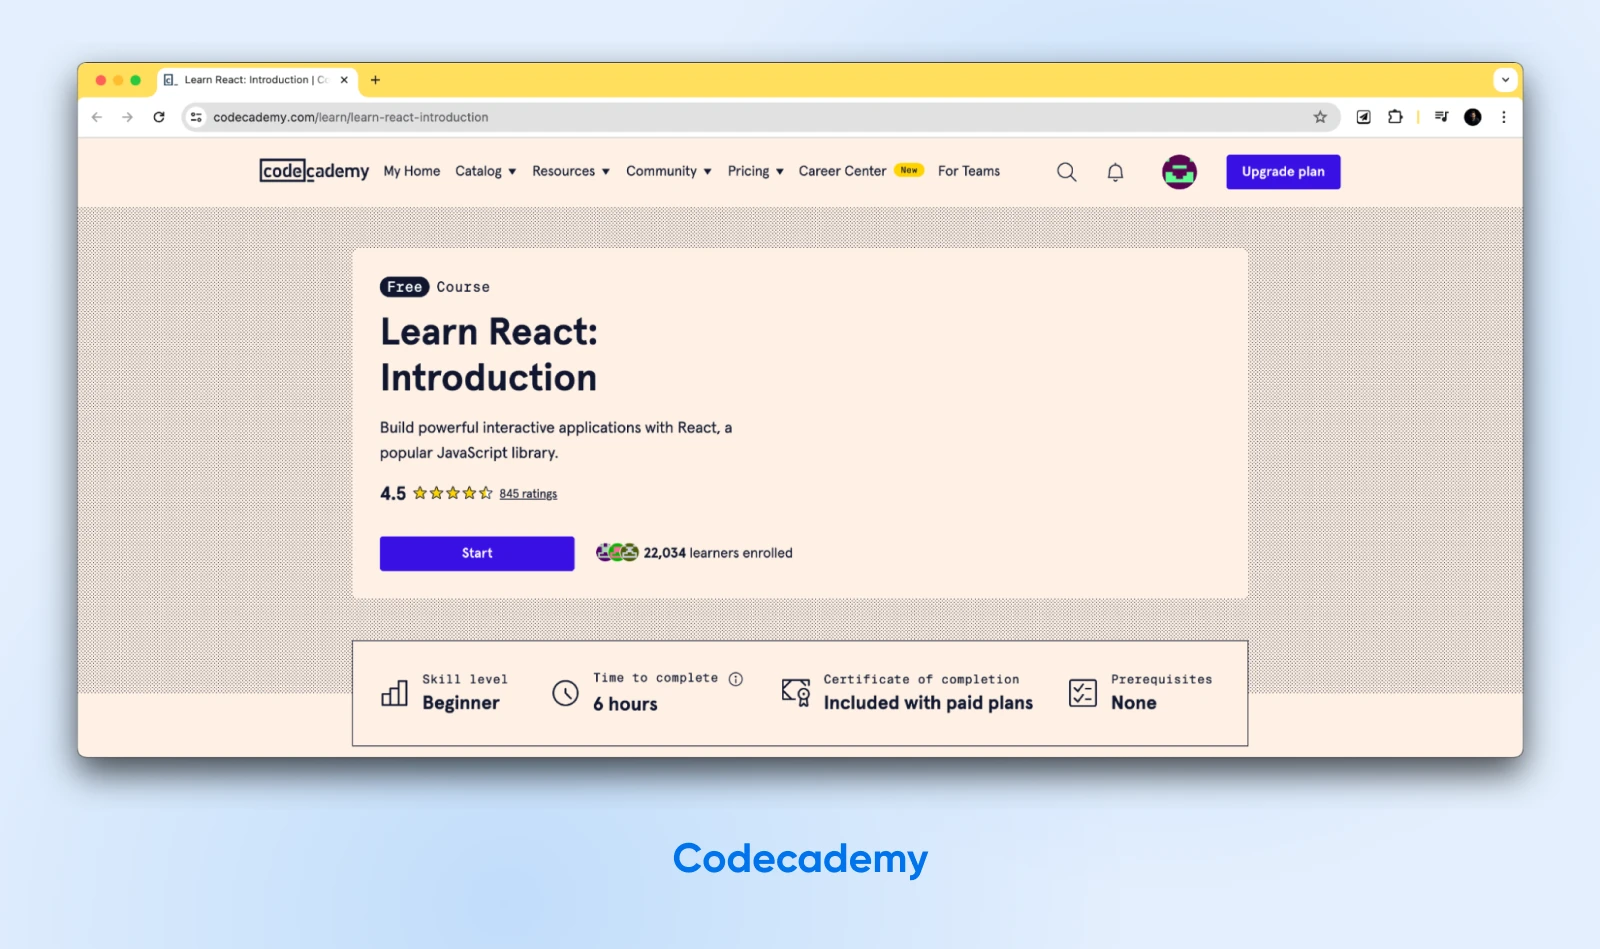 Codecademy's free course, "Learn React: Introduction," gets 4.5 stars from over 800 ratings